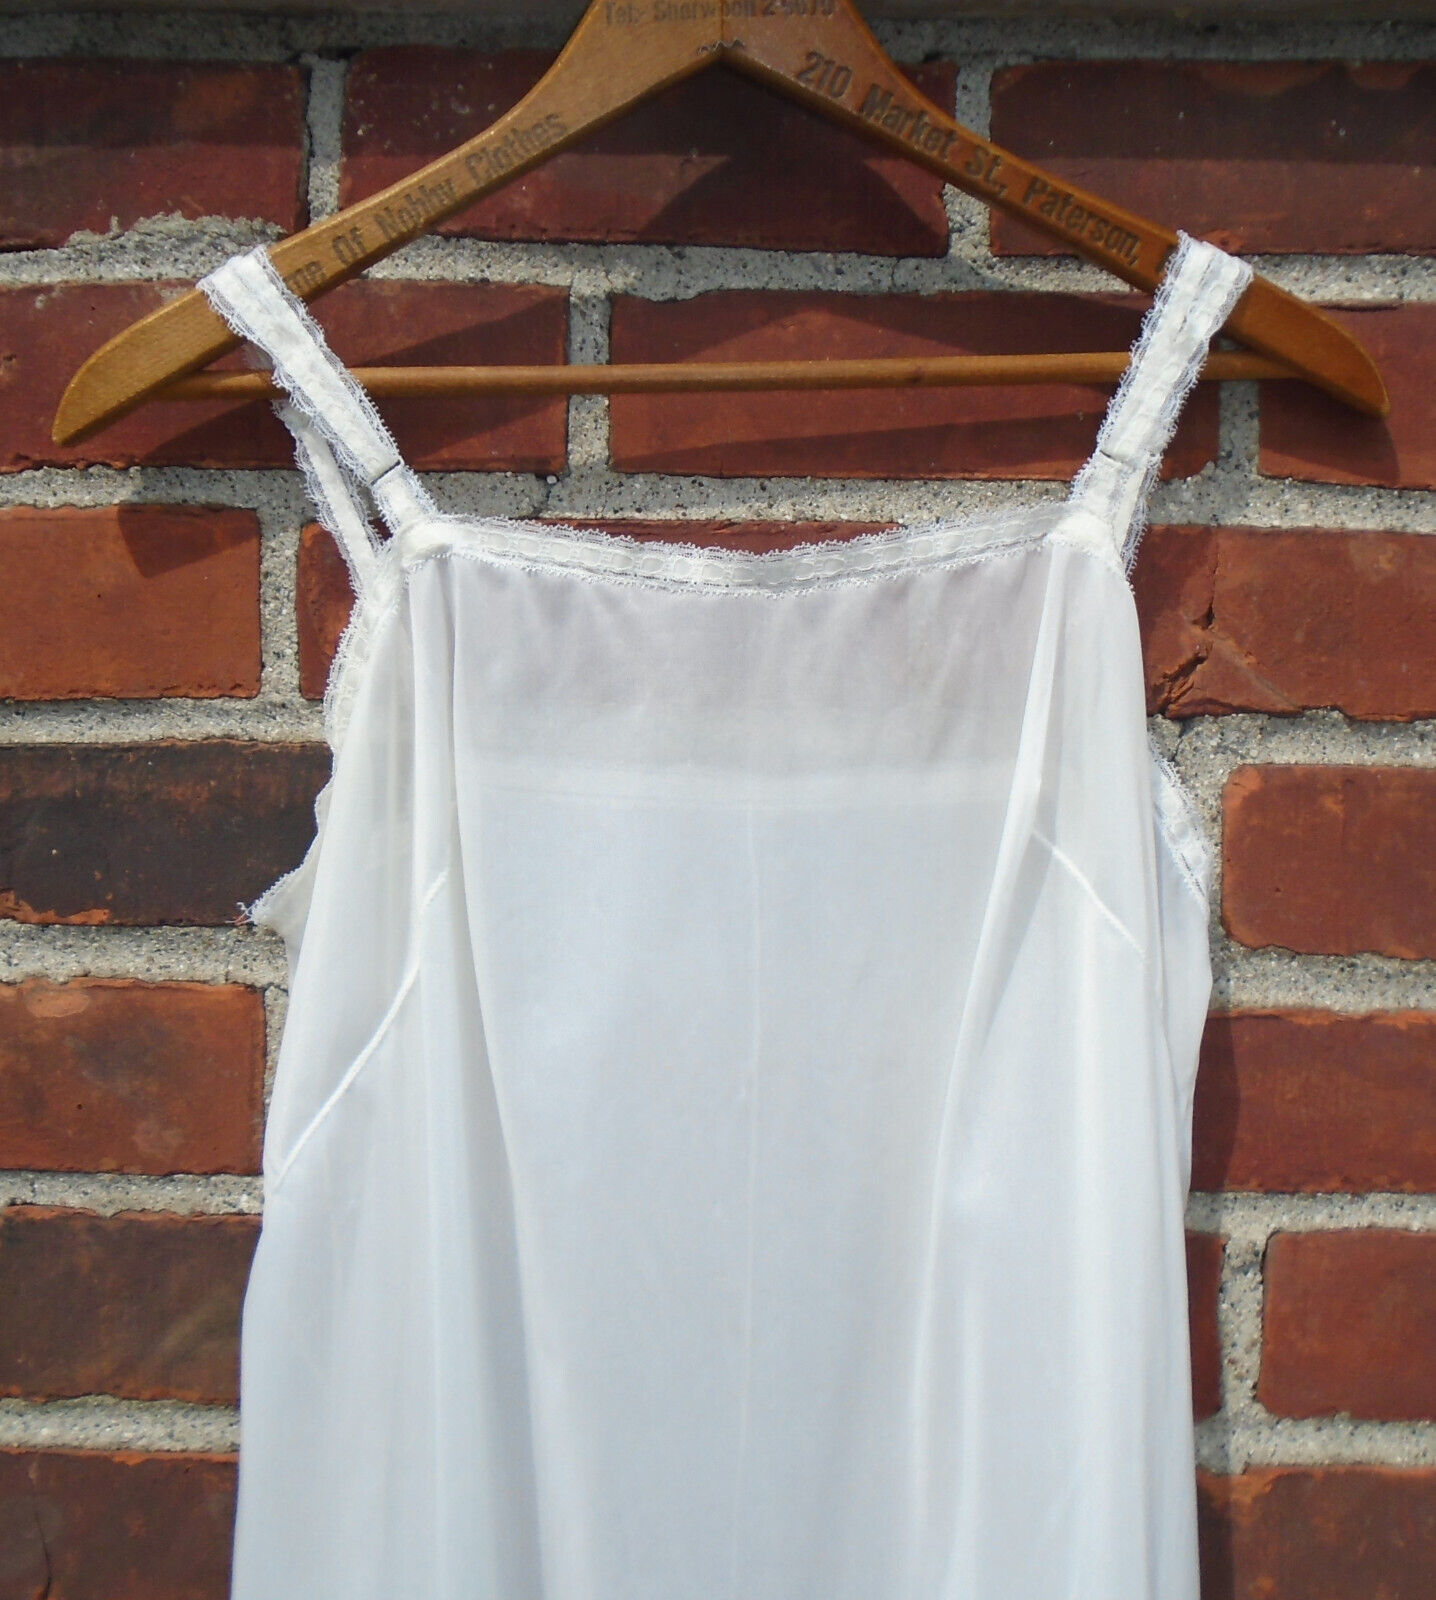 Primary image for Vanity Fair Vintage Slip Dress White Lace Accents Size 36